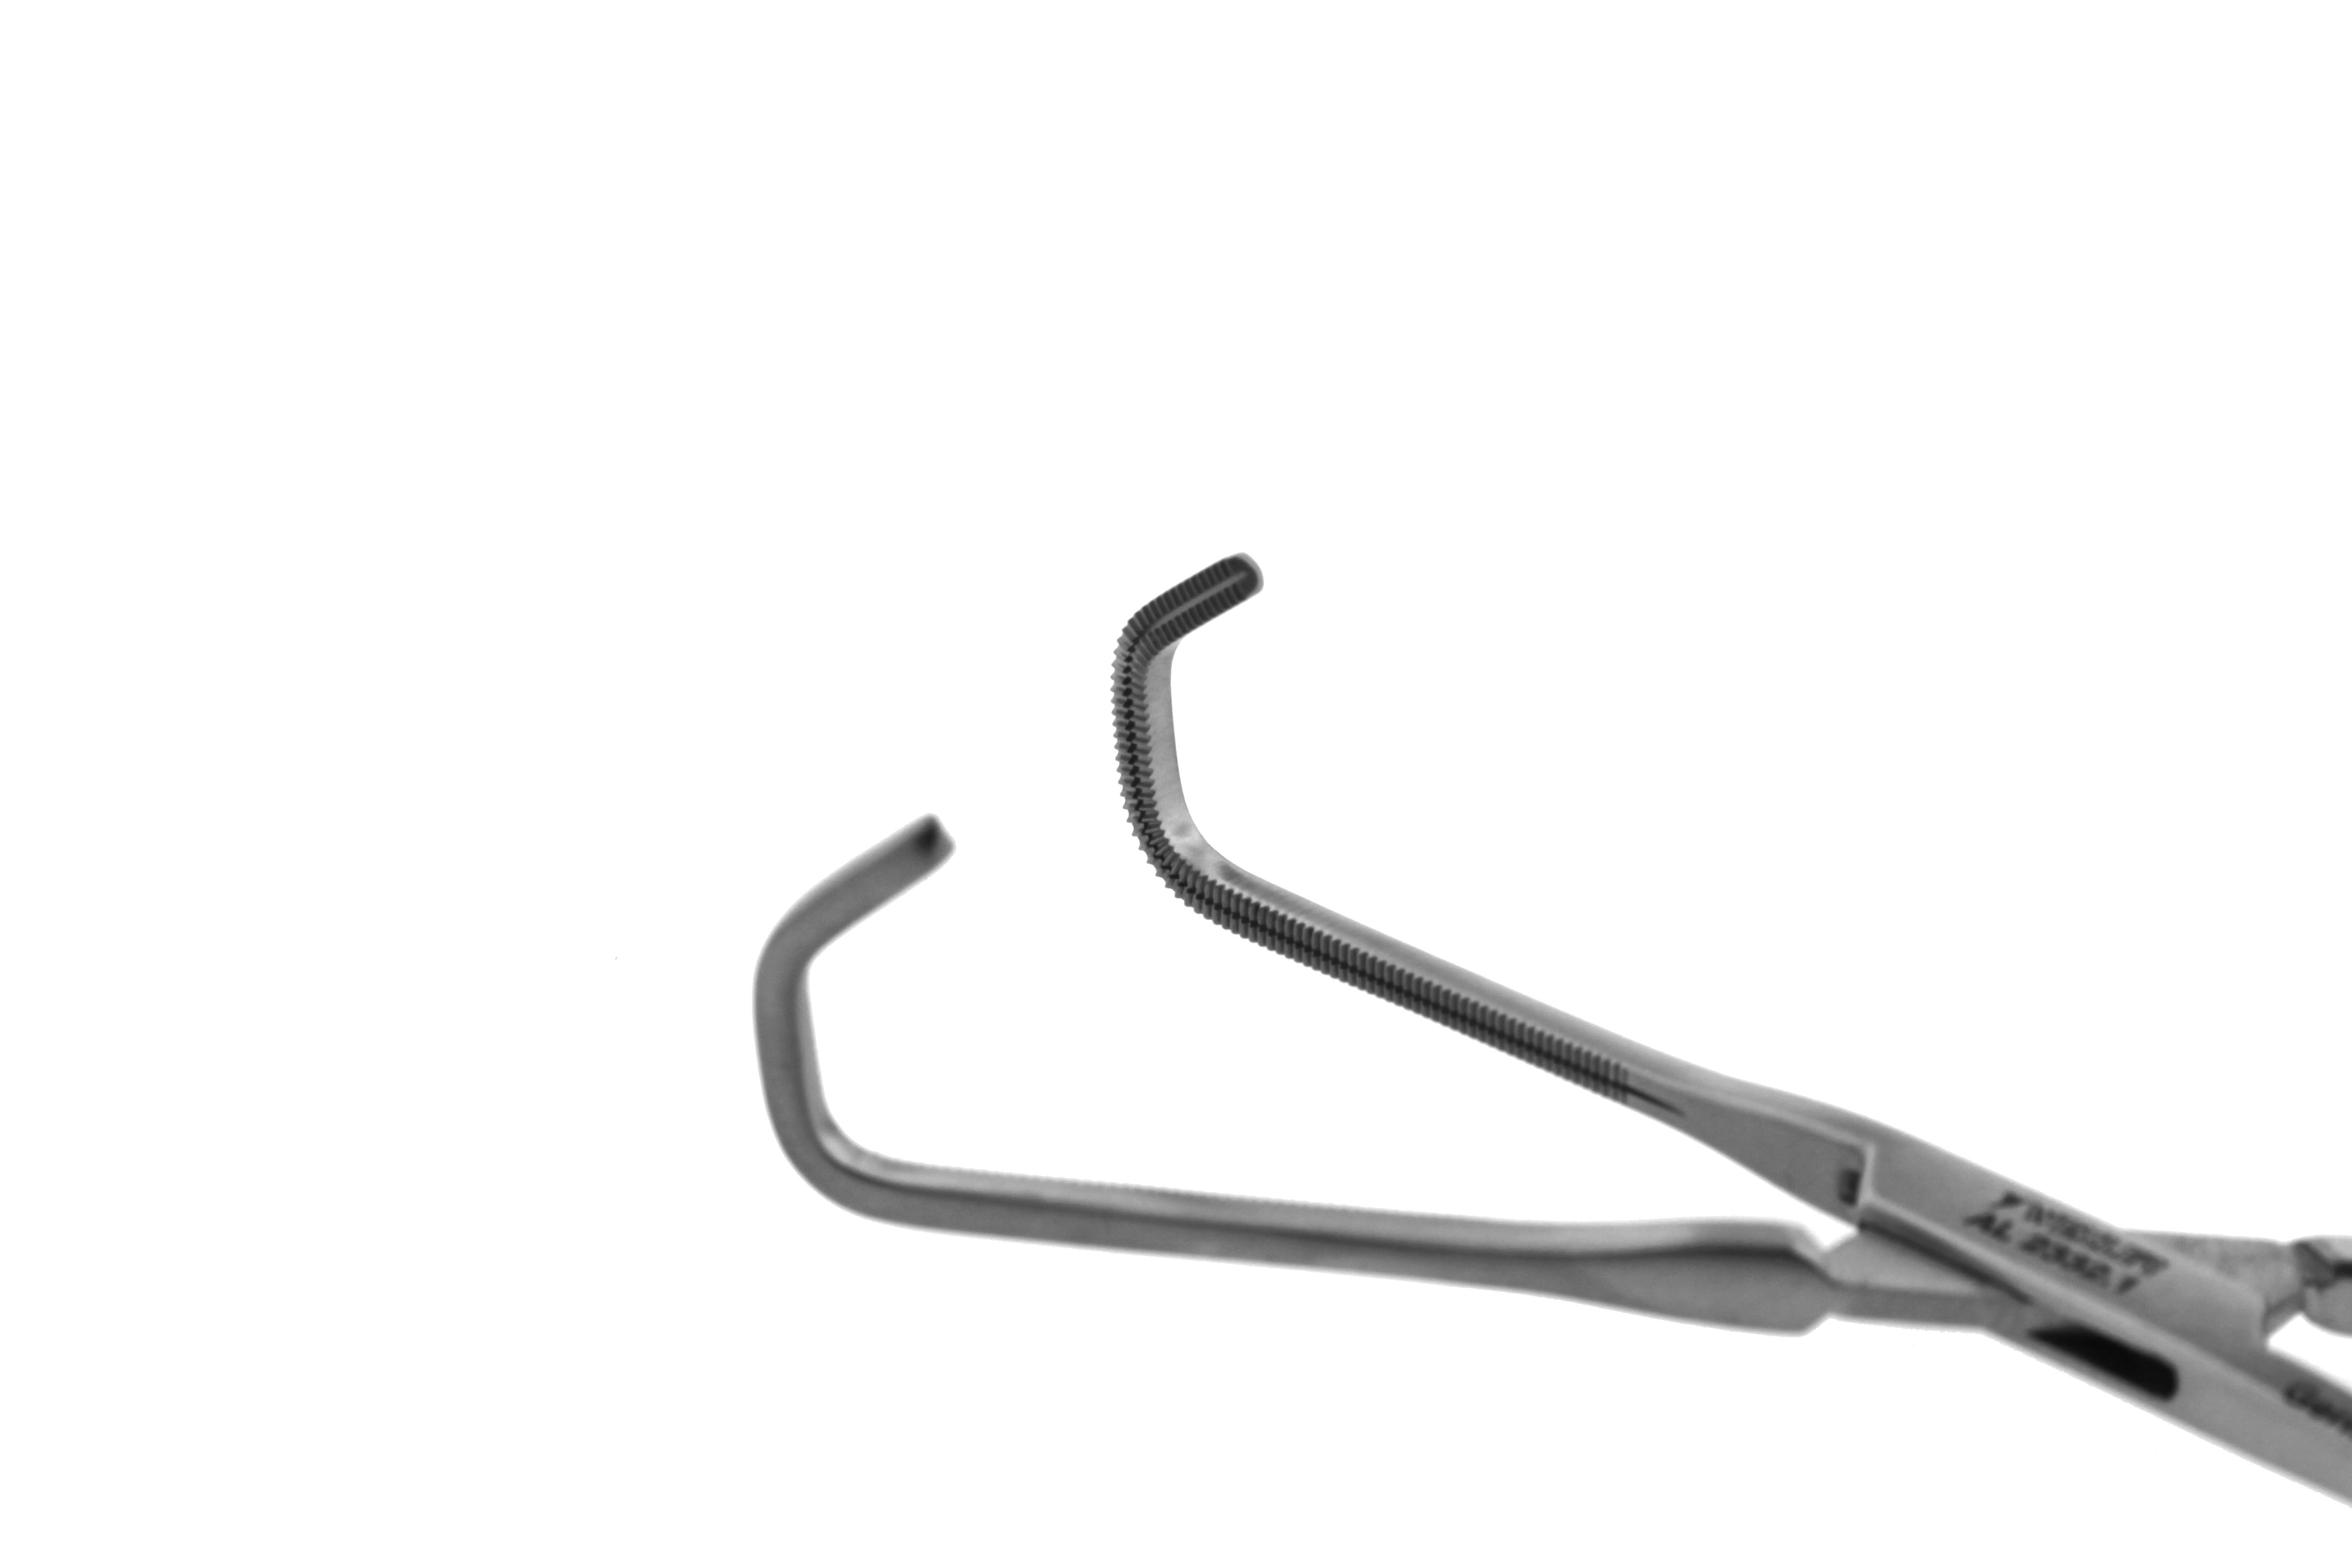 Wexler Baby Vascular Clamps - Angled Cooley Atraumatic jaws